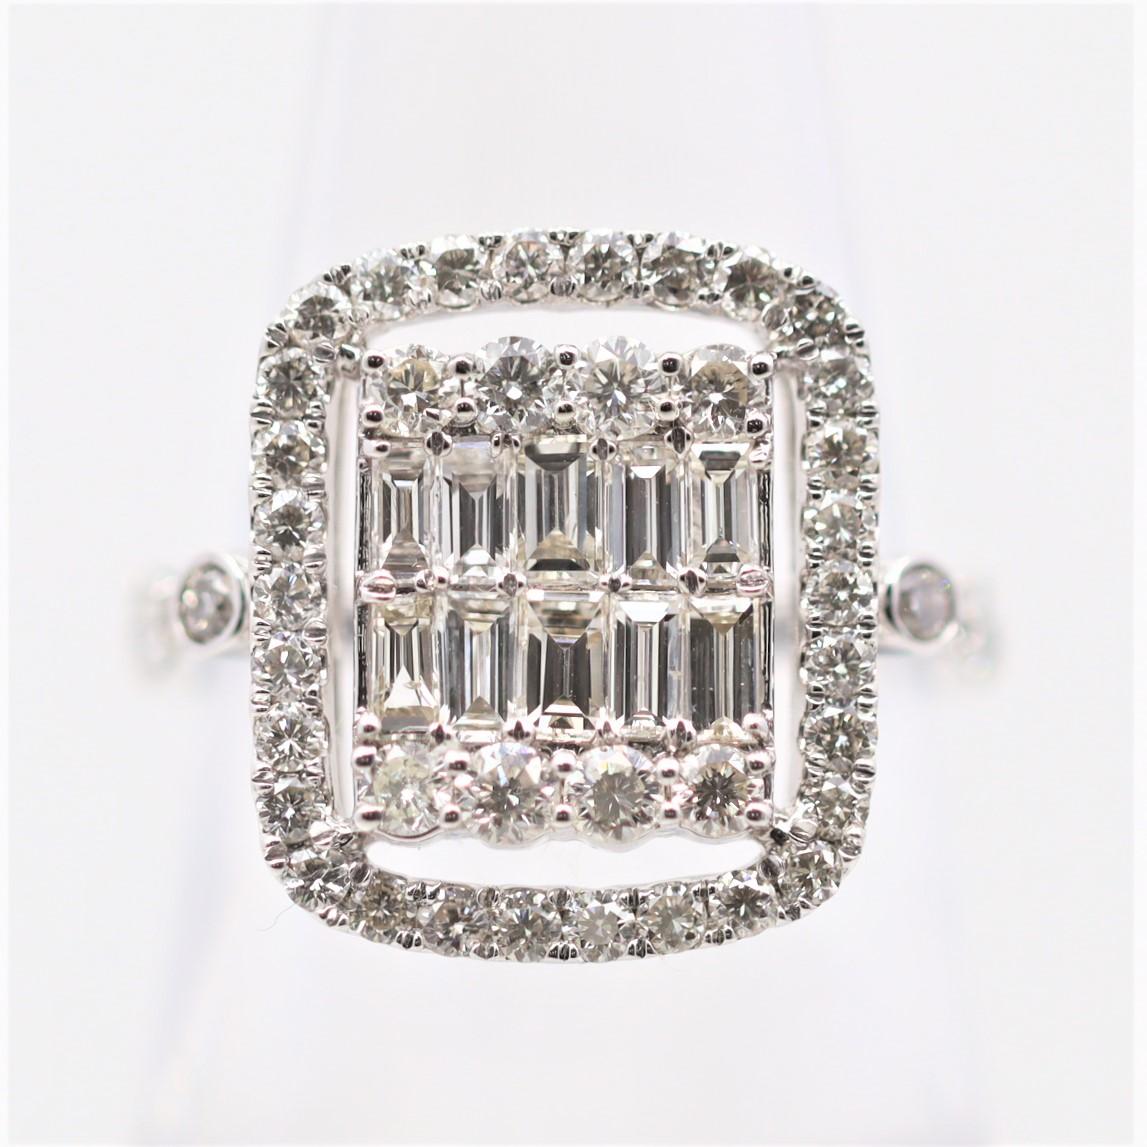 A unique diamond ring featuring 2 carats of round brilliant and baguette-cut diamonds set in geometric clusters with a round diamond border around it. The different cuts of diamonds give an array of sparkle and brilliance. Hand-fabricated in